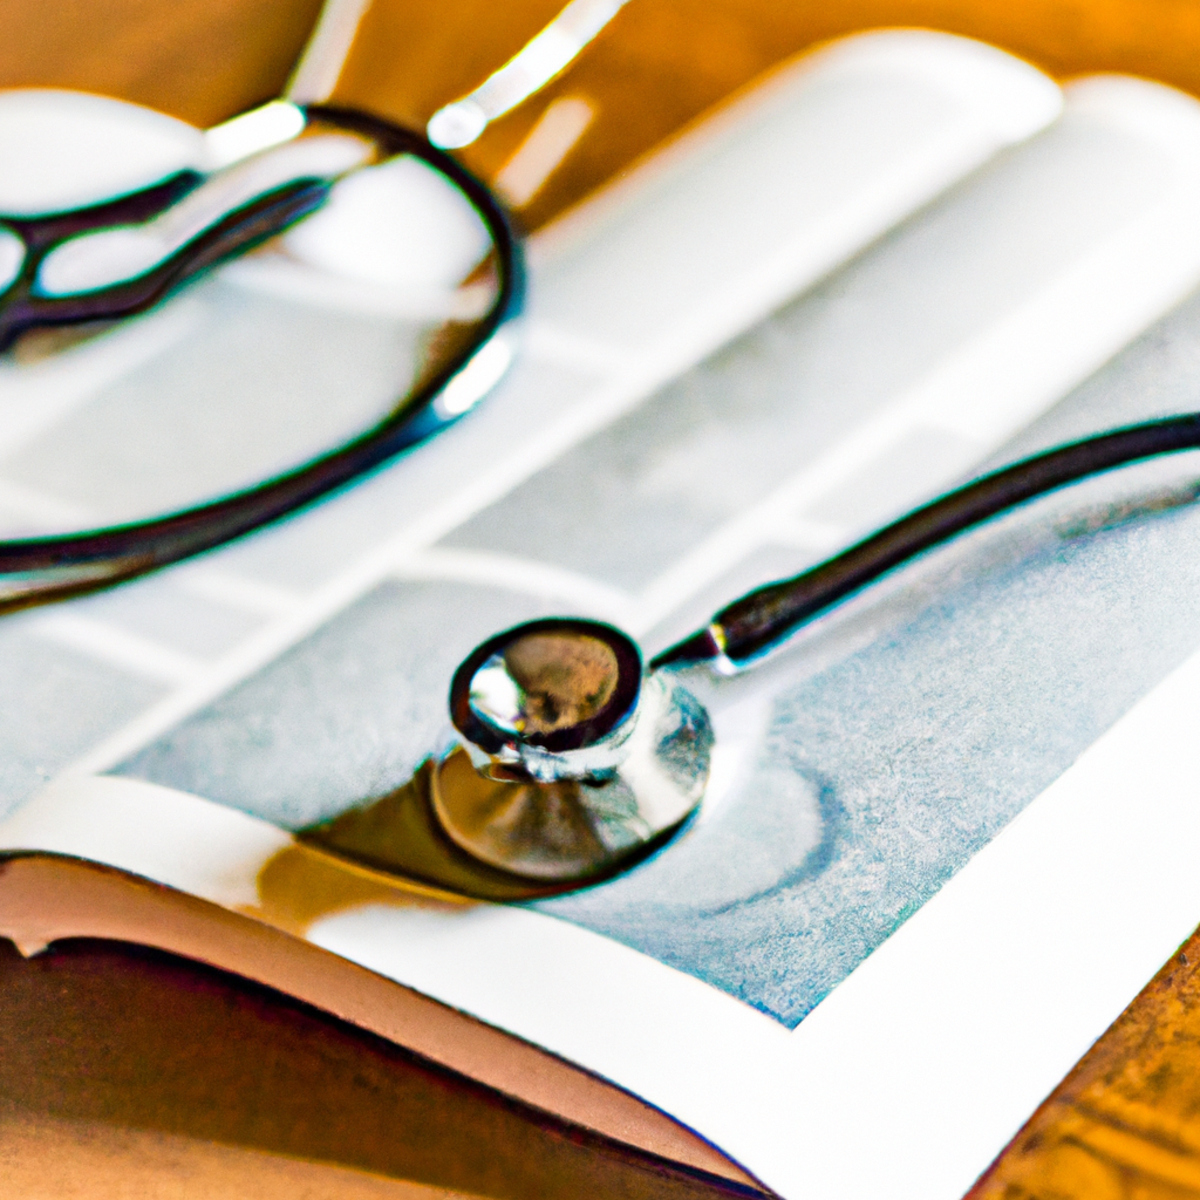 Close-up of a polished stethoscope on a wooden table, with medical book, heart-shaped paperweight, pen, and notepad - Loeys-Dietz Syndrome